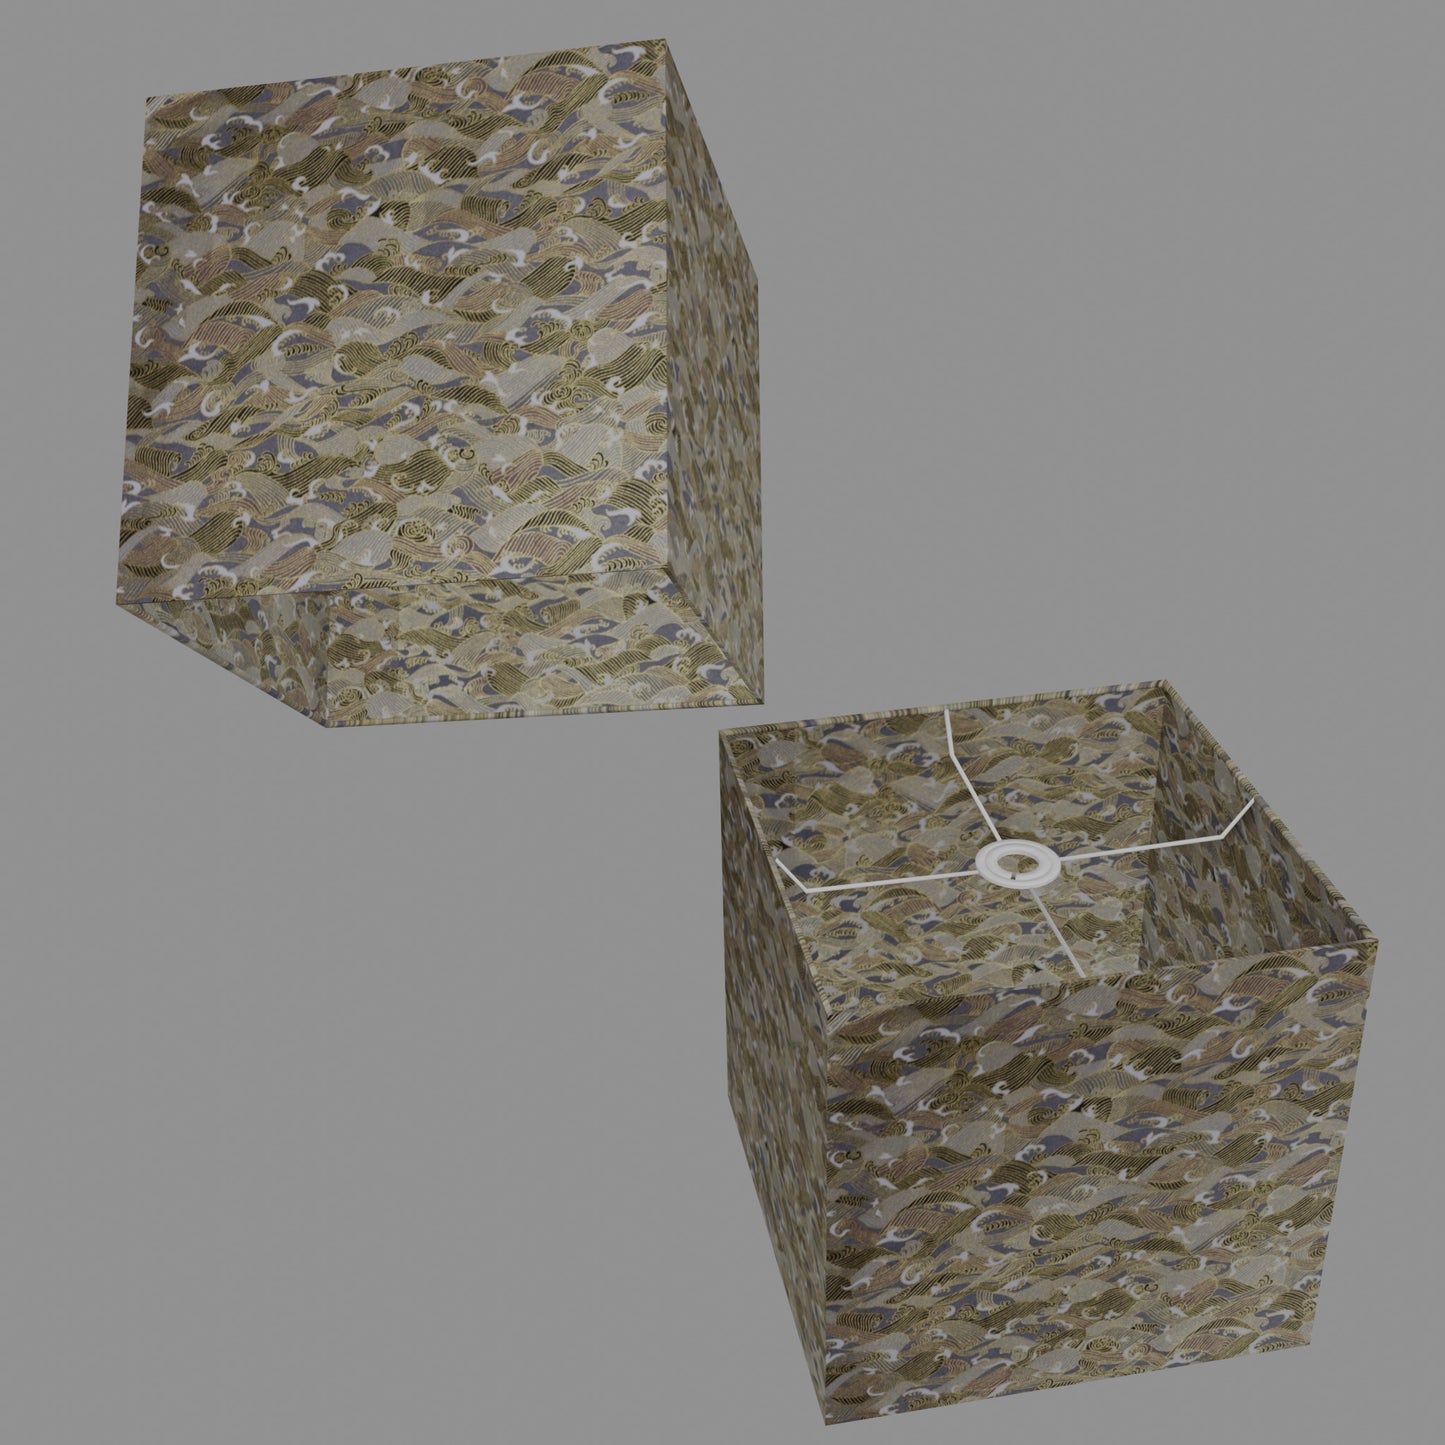 Square Lamp Shade - W03 ~ Gold Waves on Greys, 30cm(w) x 30cm(h) x 30cm(d)